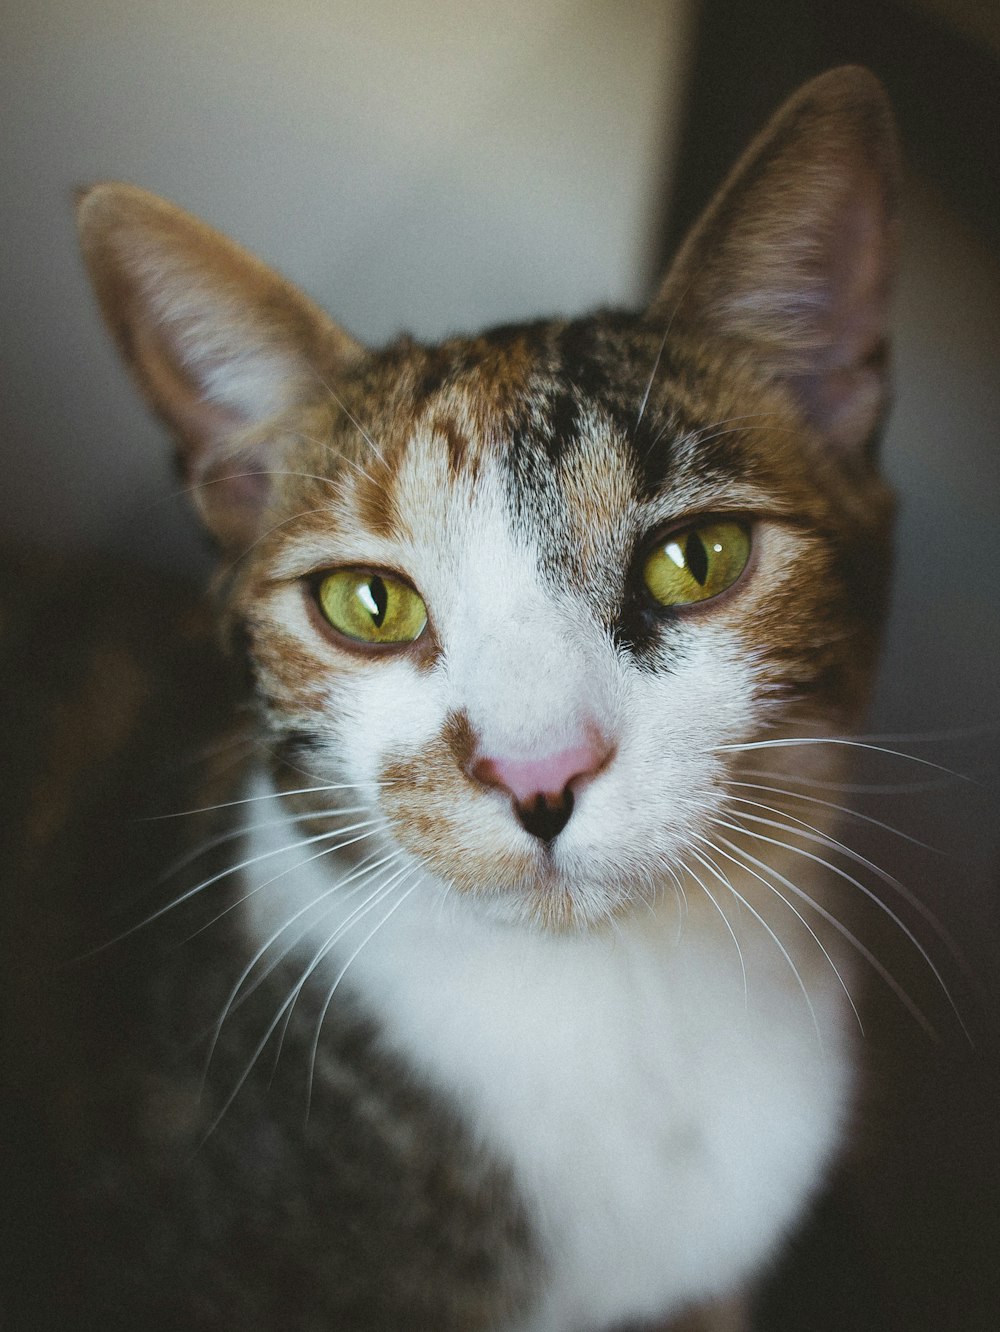 brown and white cat in close up photography